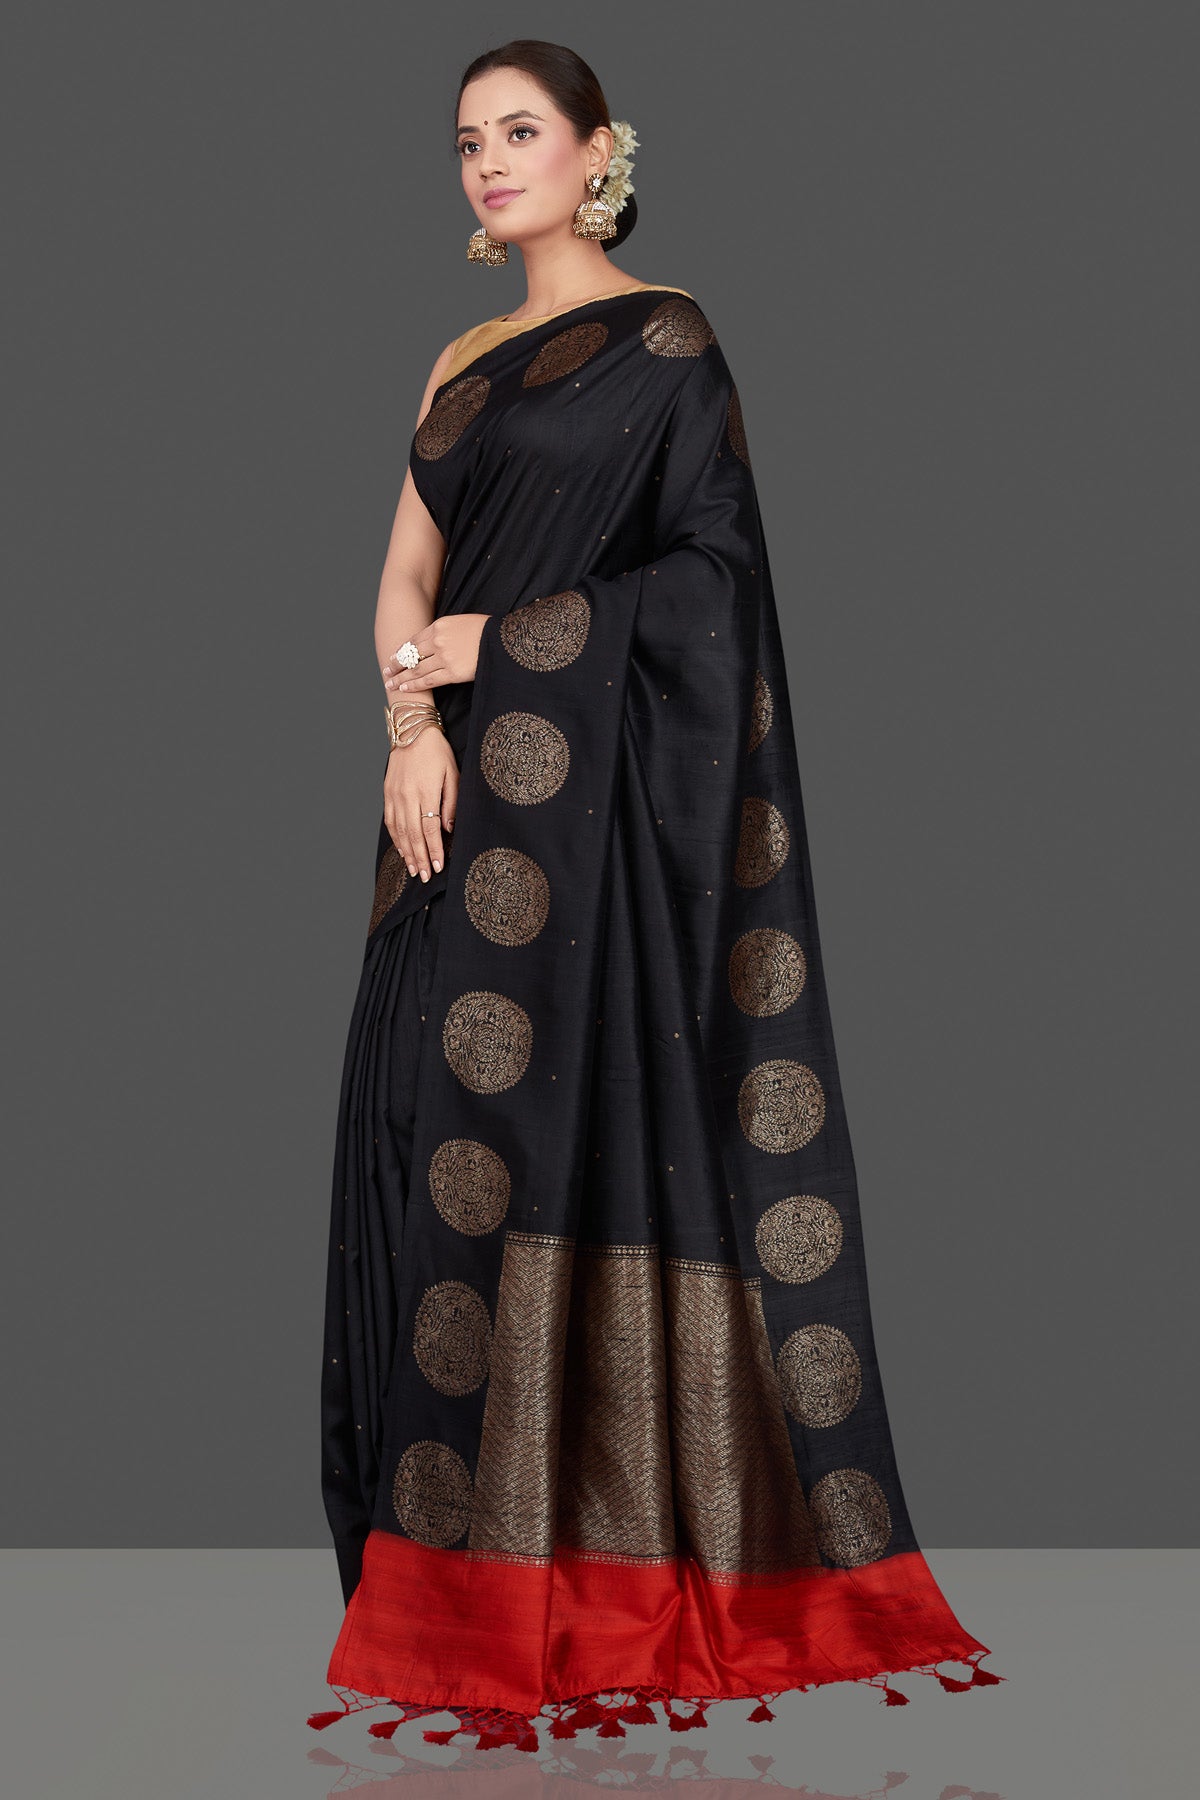 Buy ravishing black tussar Benarasi saree online in USA with antique zari buta border. Go for stunning Indian designer sarees, georgette sarees, handwoven saris, embroidered sarees for festive occasions and weddings from Pure Elegance Indian clothing store in USA.-pallu